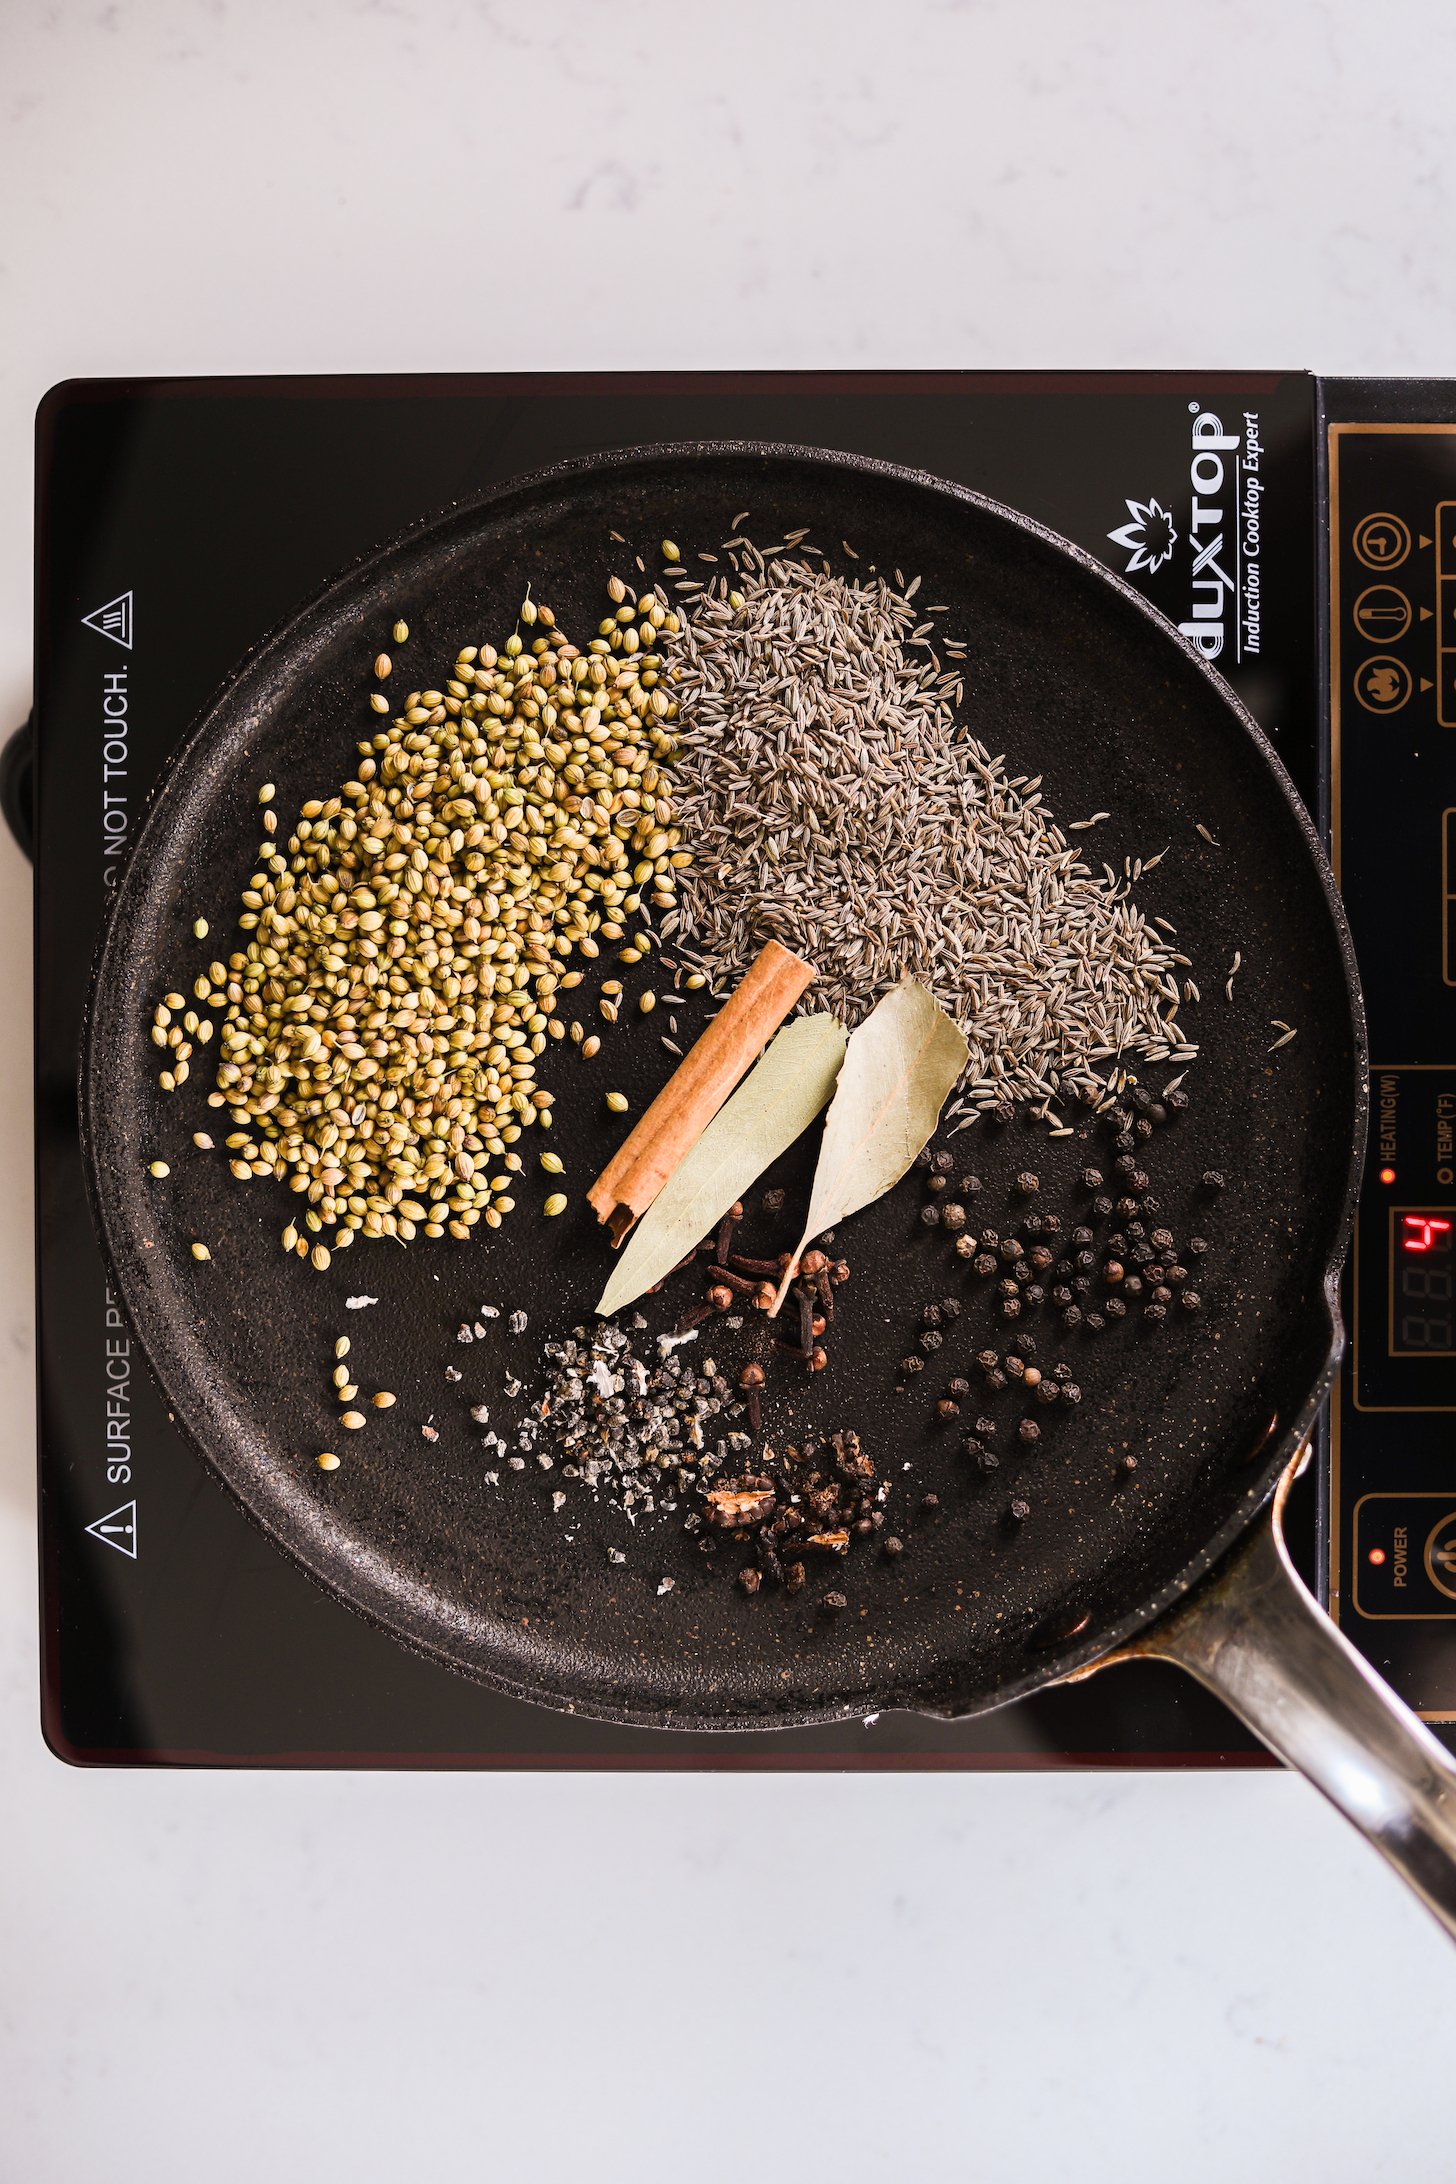 Whole spices on a tava (Indian girdle) heating over a mobile stovetop.